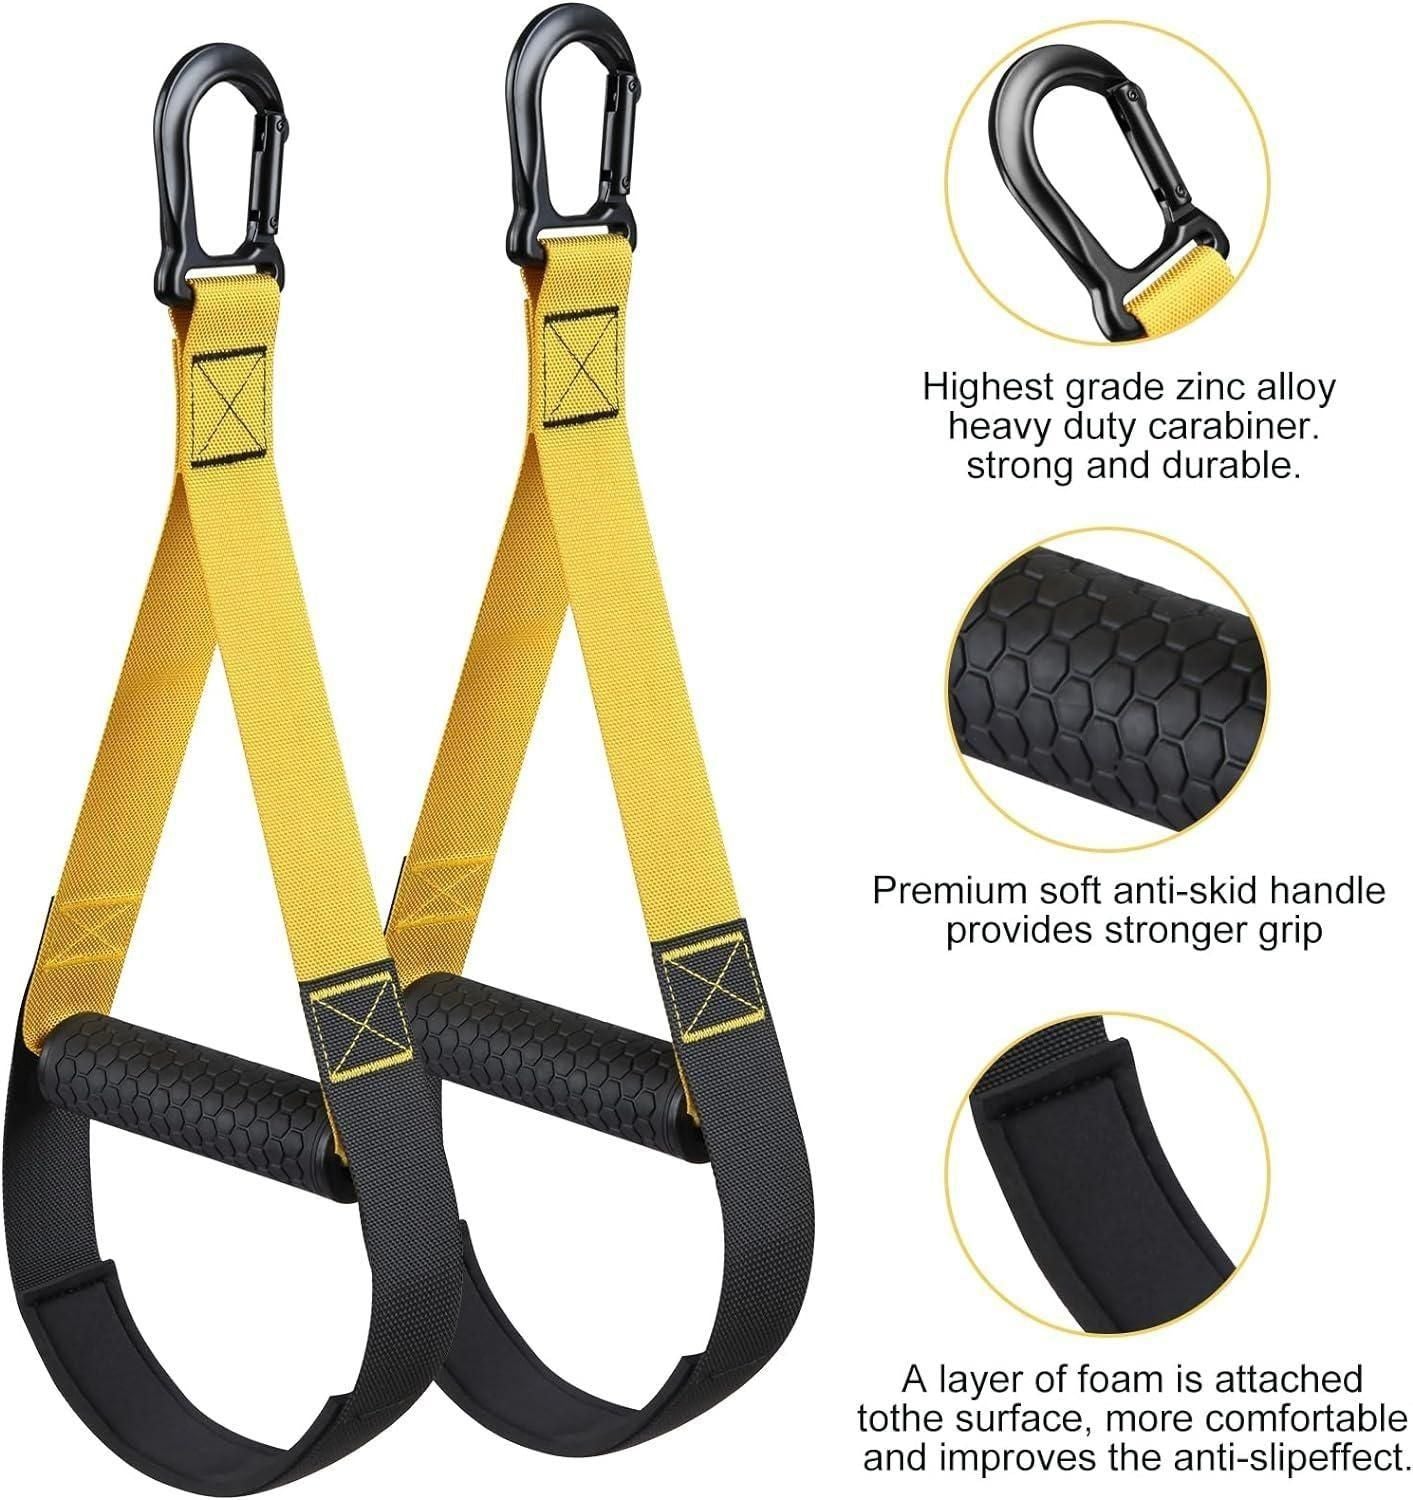 Home Resistance Training Kit, Resistance Trainer Exercise Straps with Handles